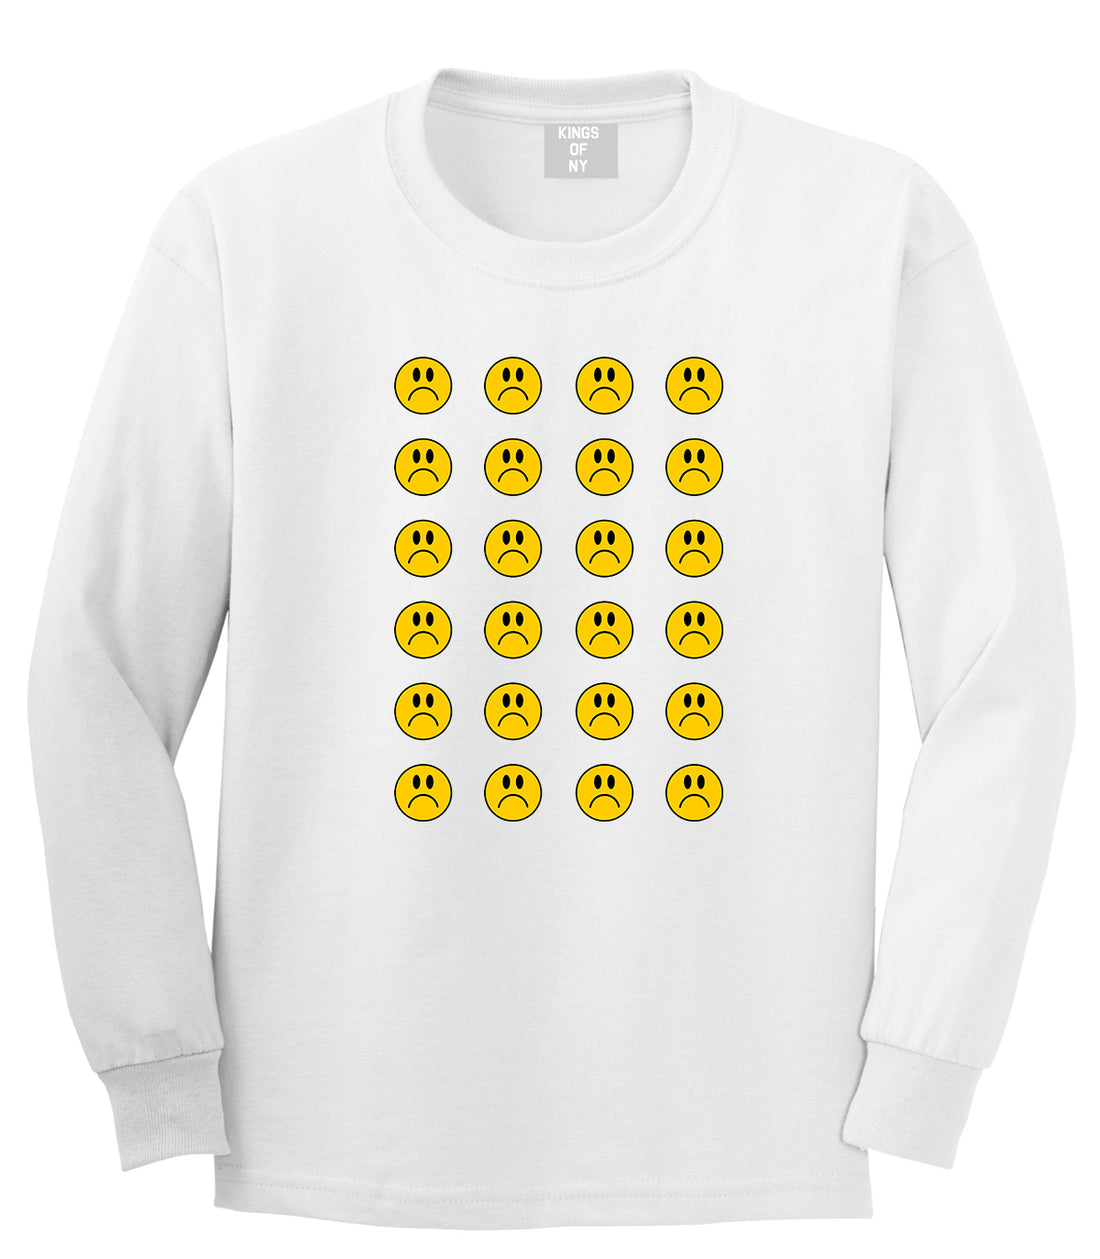 All Over Sad Face Mens Long Sleeve T-Shirt White by Kings Of NY